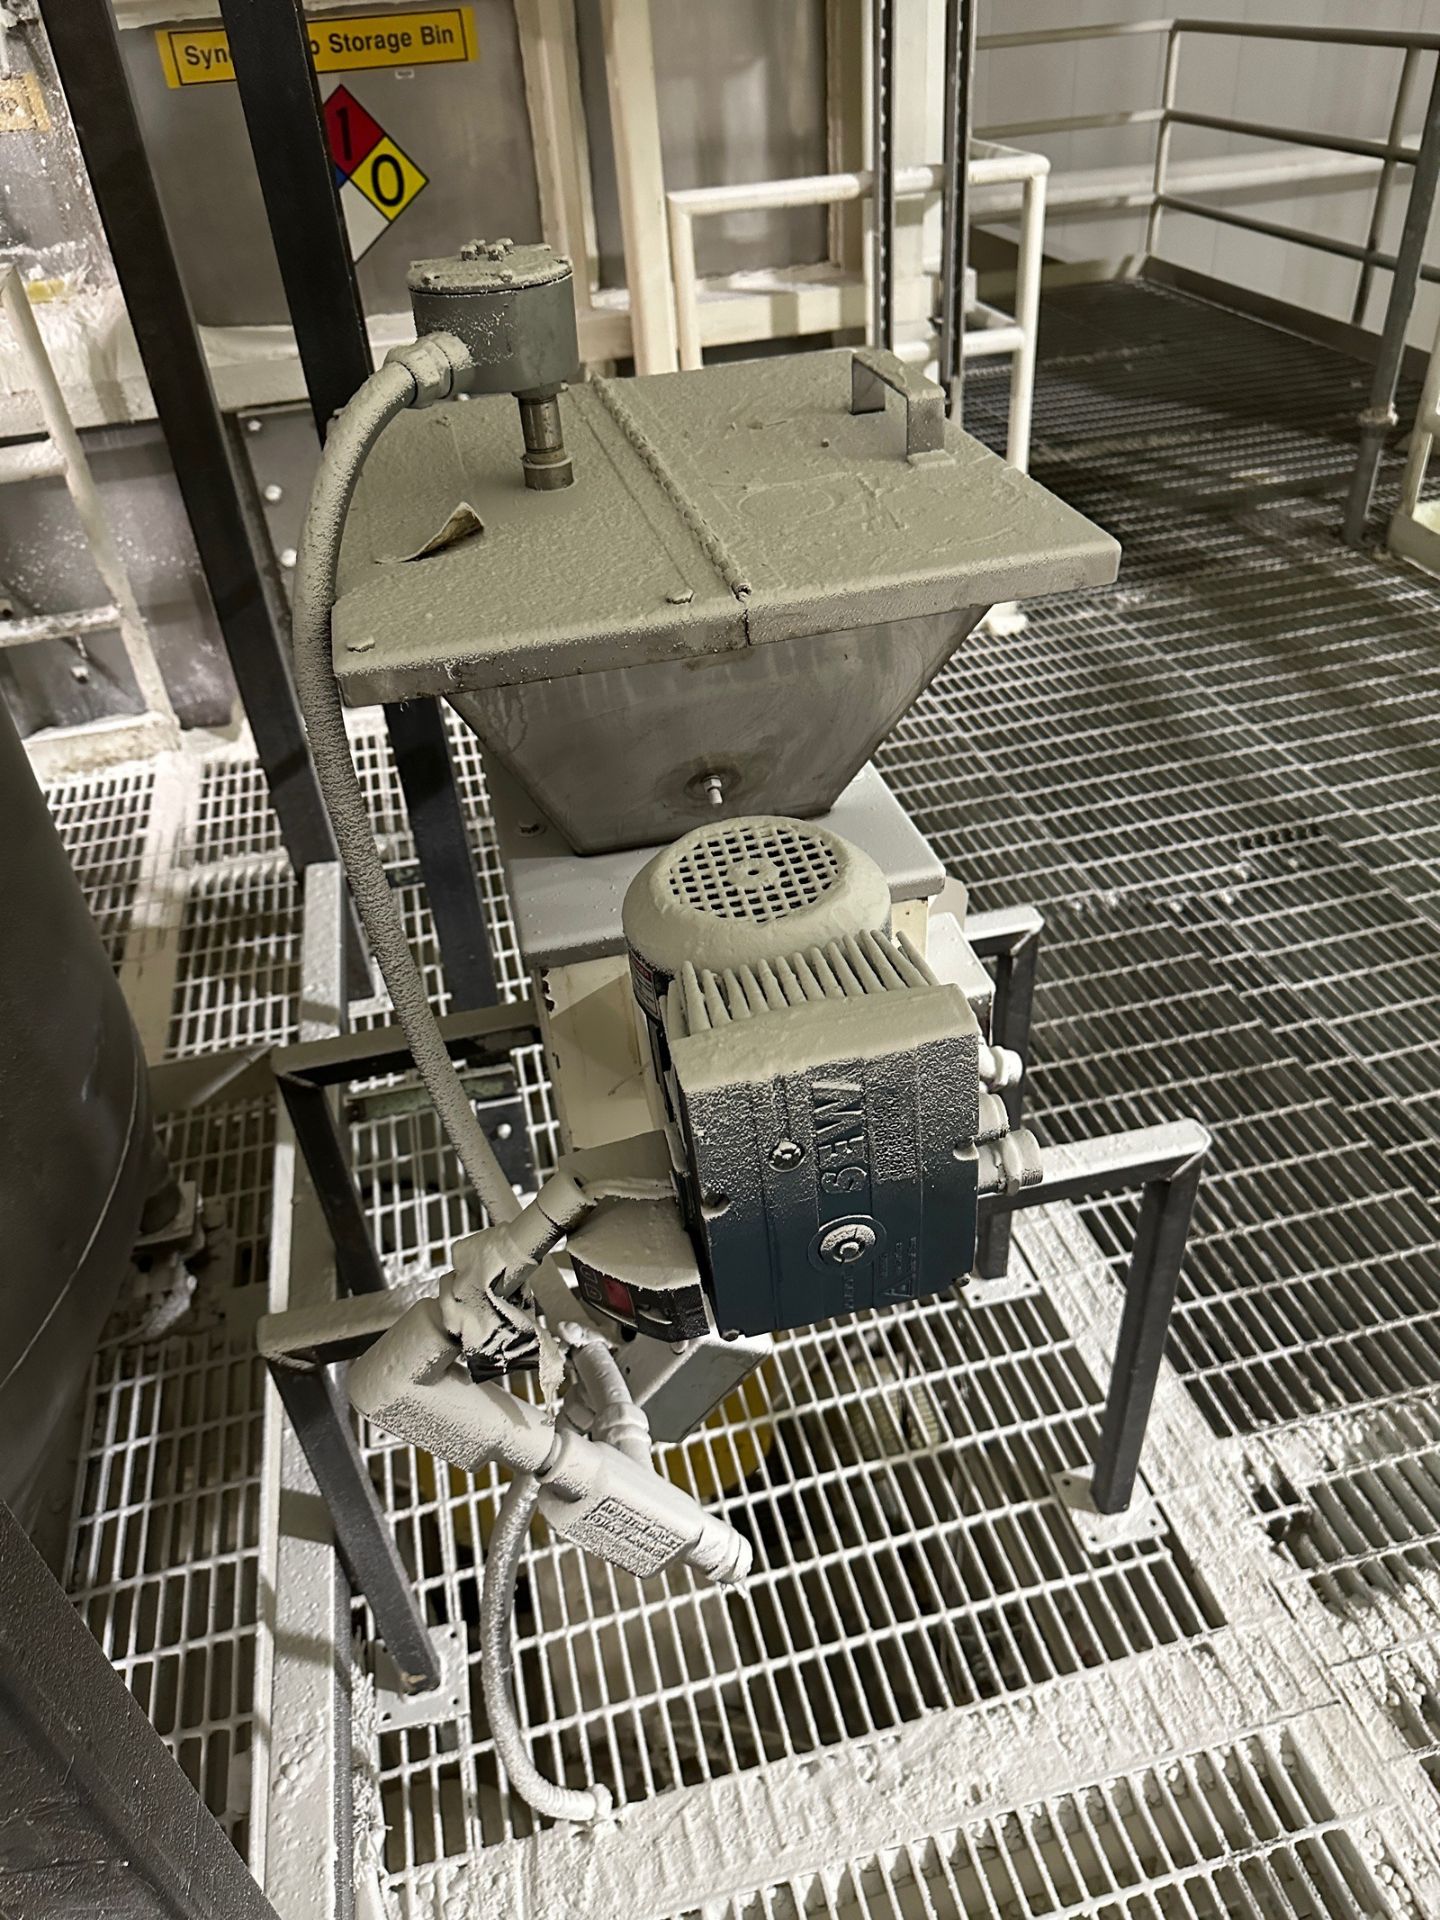 Metalfab Stainless Steel Hopper with Grinder/Auger | Rig Fee $200 - Image 3 of 5